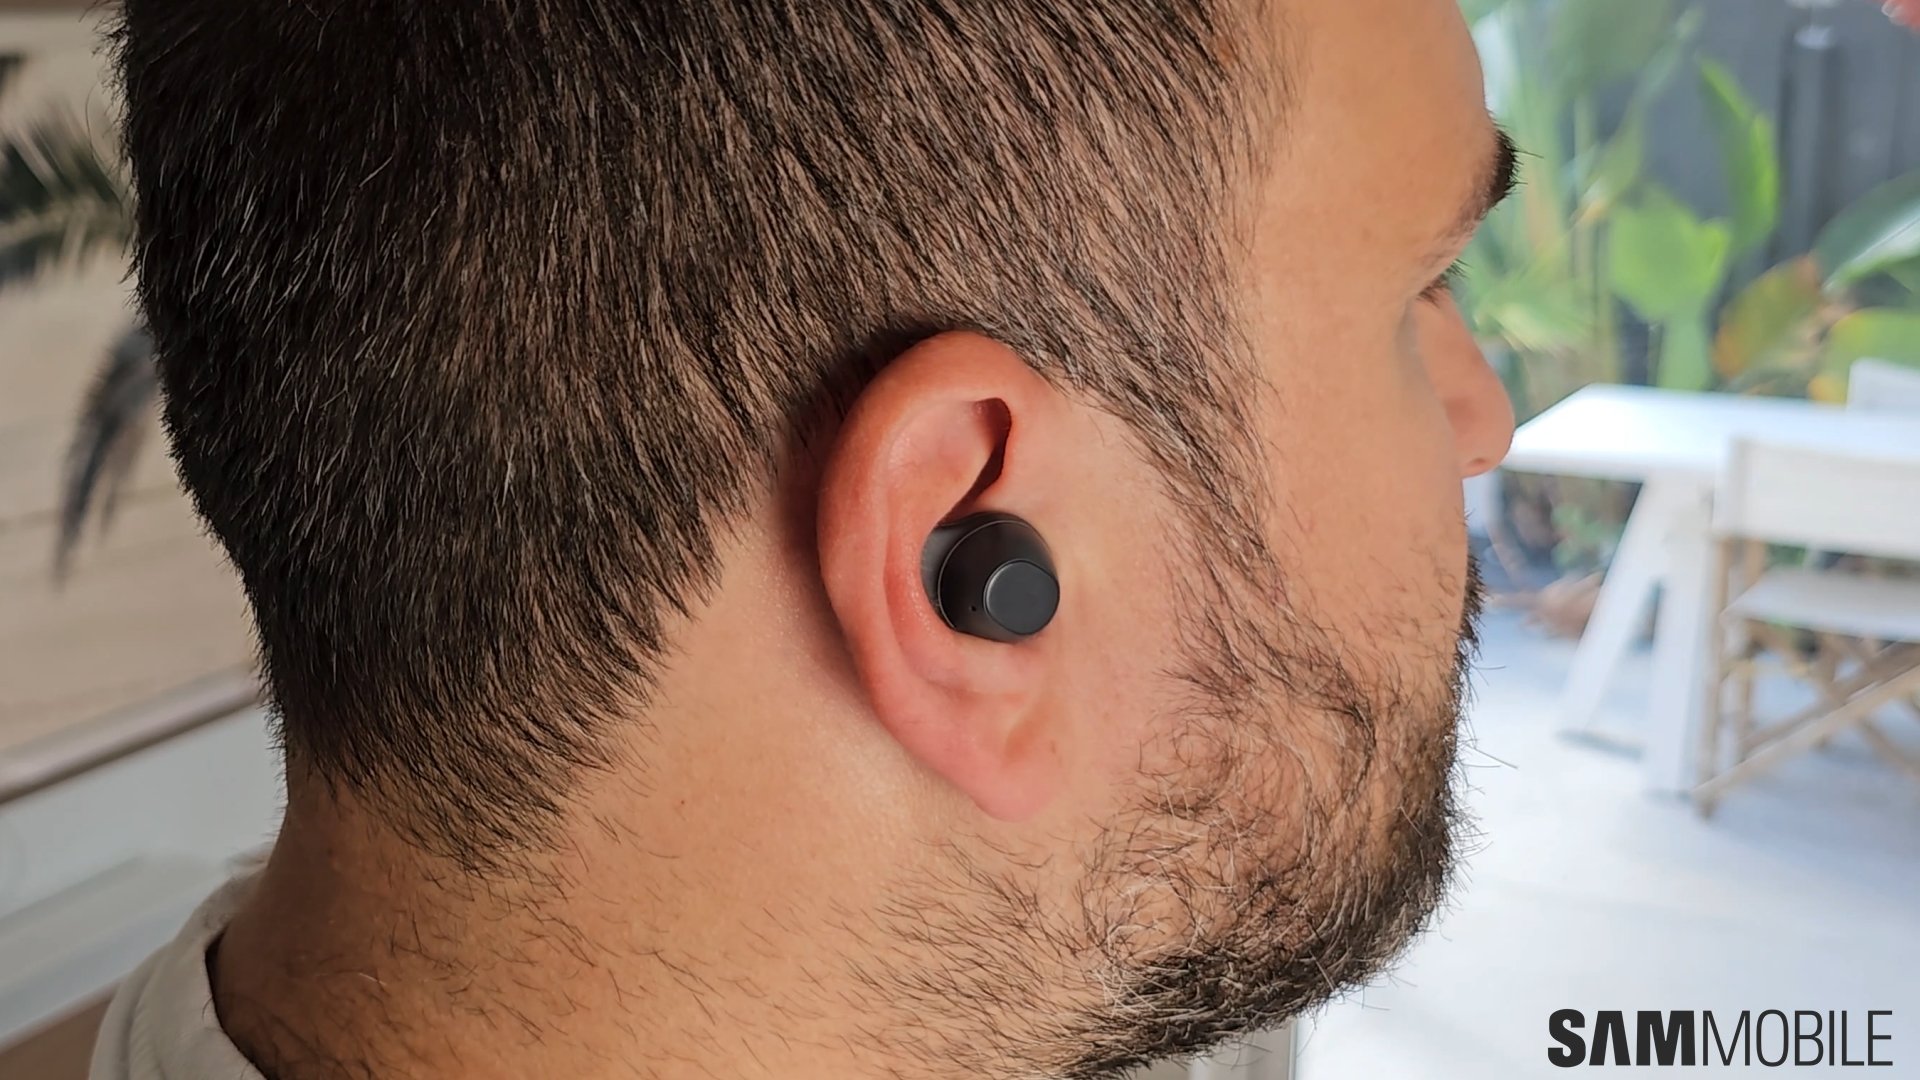 SamMobile Hints at Samsung's Launch into Hearing Aid Market